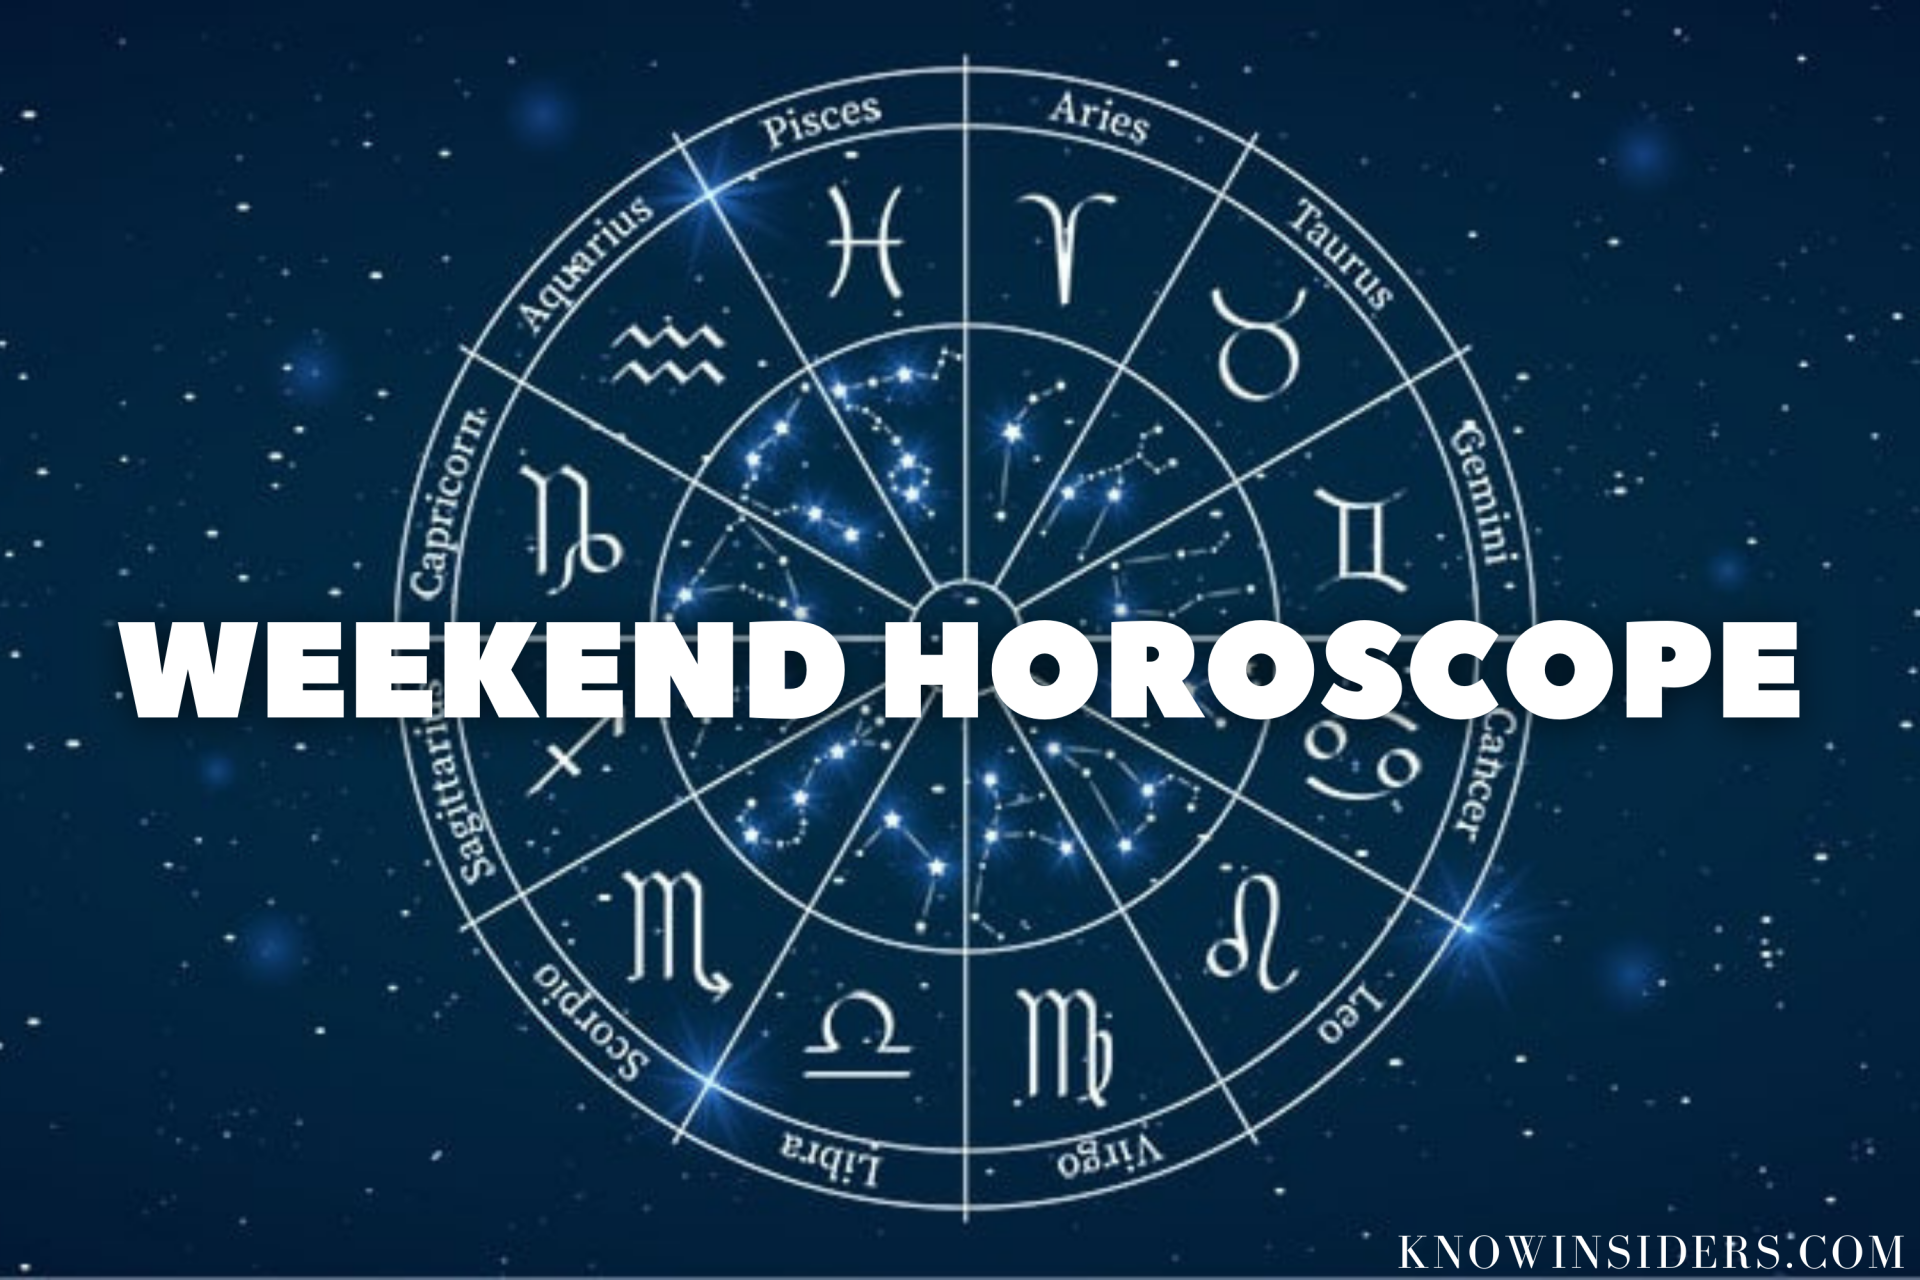 Weekend Horoscope (April 30 - May 2): Predictions for All 12 Zodiac Signs